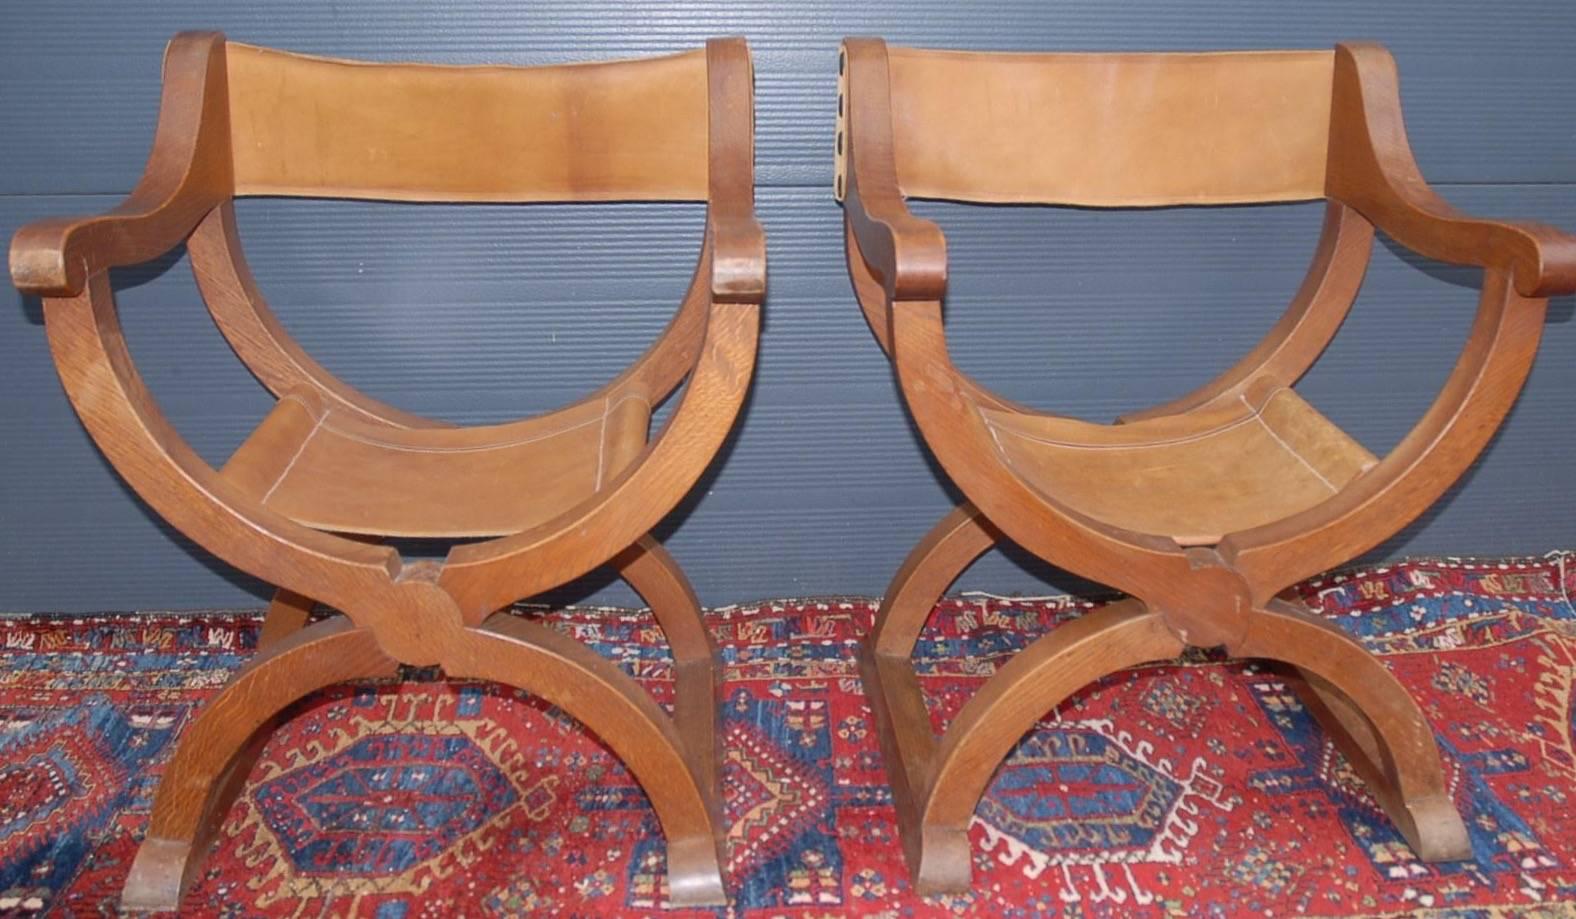 Stylish and hand made X-framed folding chairs from circa 1950.

These stylized Renaissance chairs are made of solid tiger oak and they come with leather seats and backs that are all in Fine condition. The combination of the smooth shape and